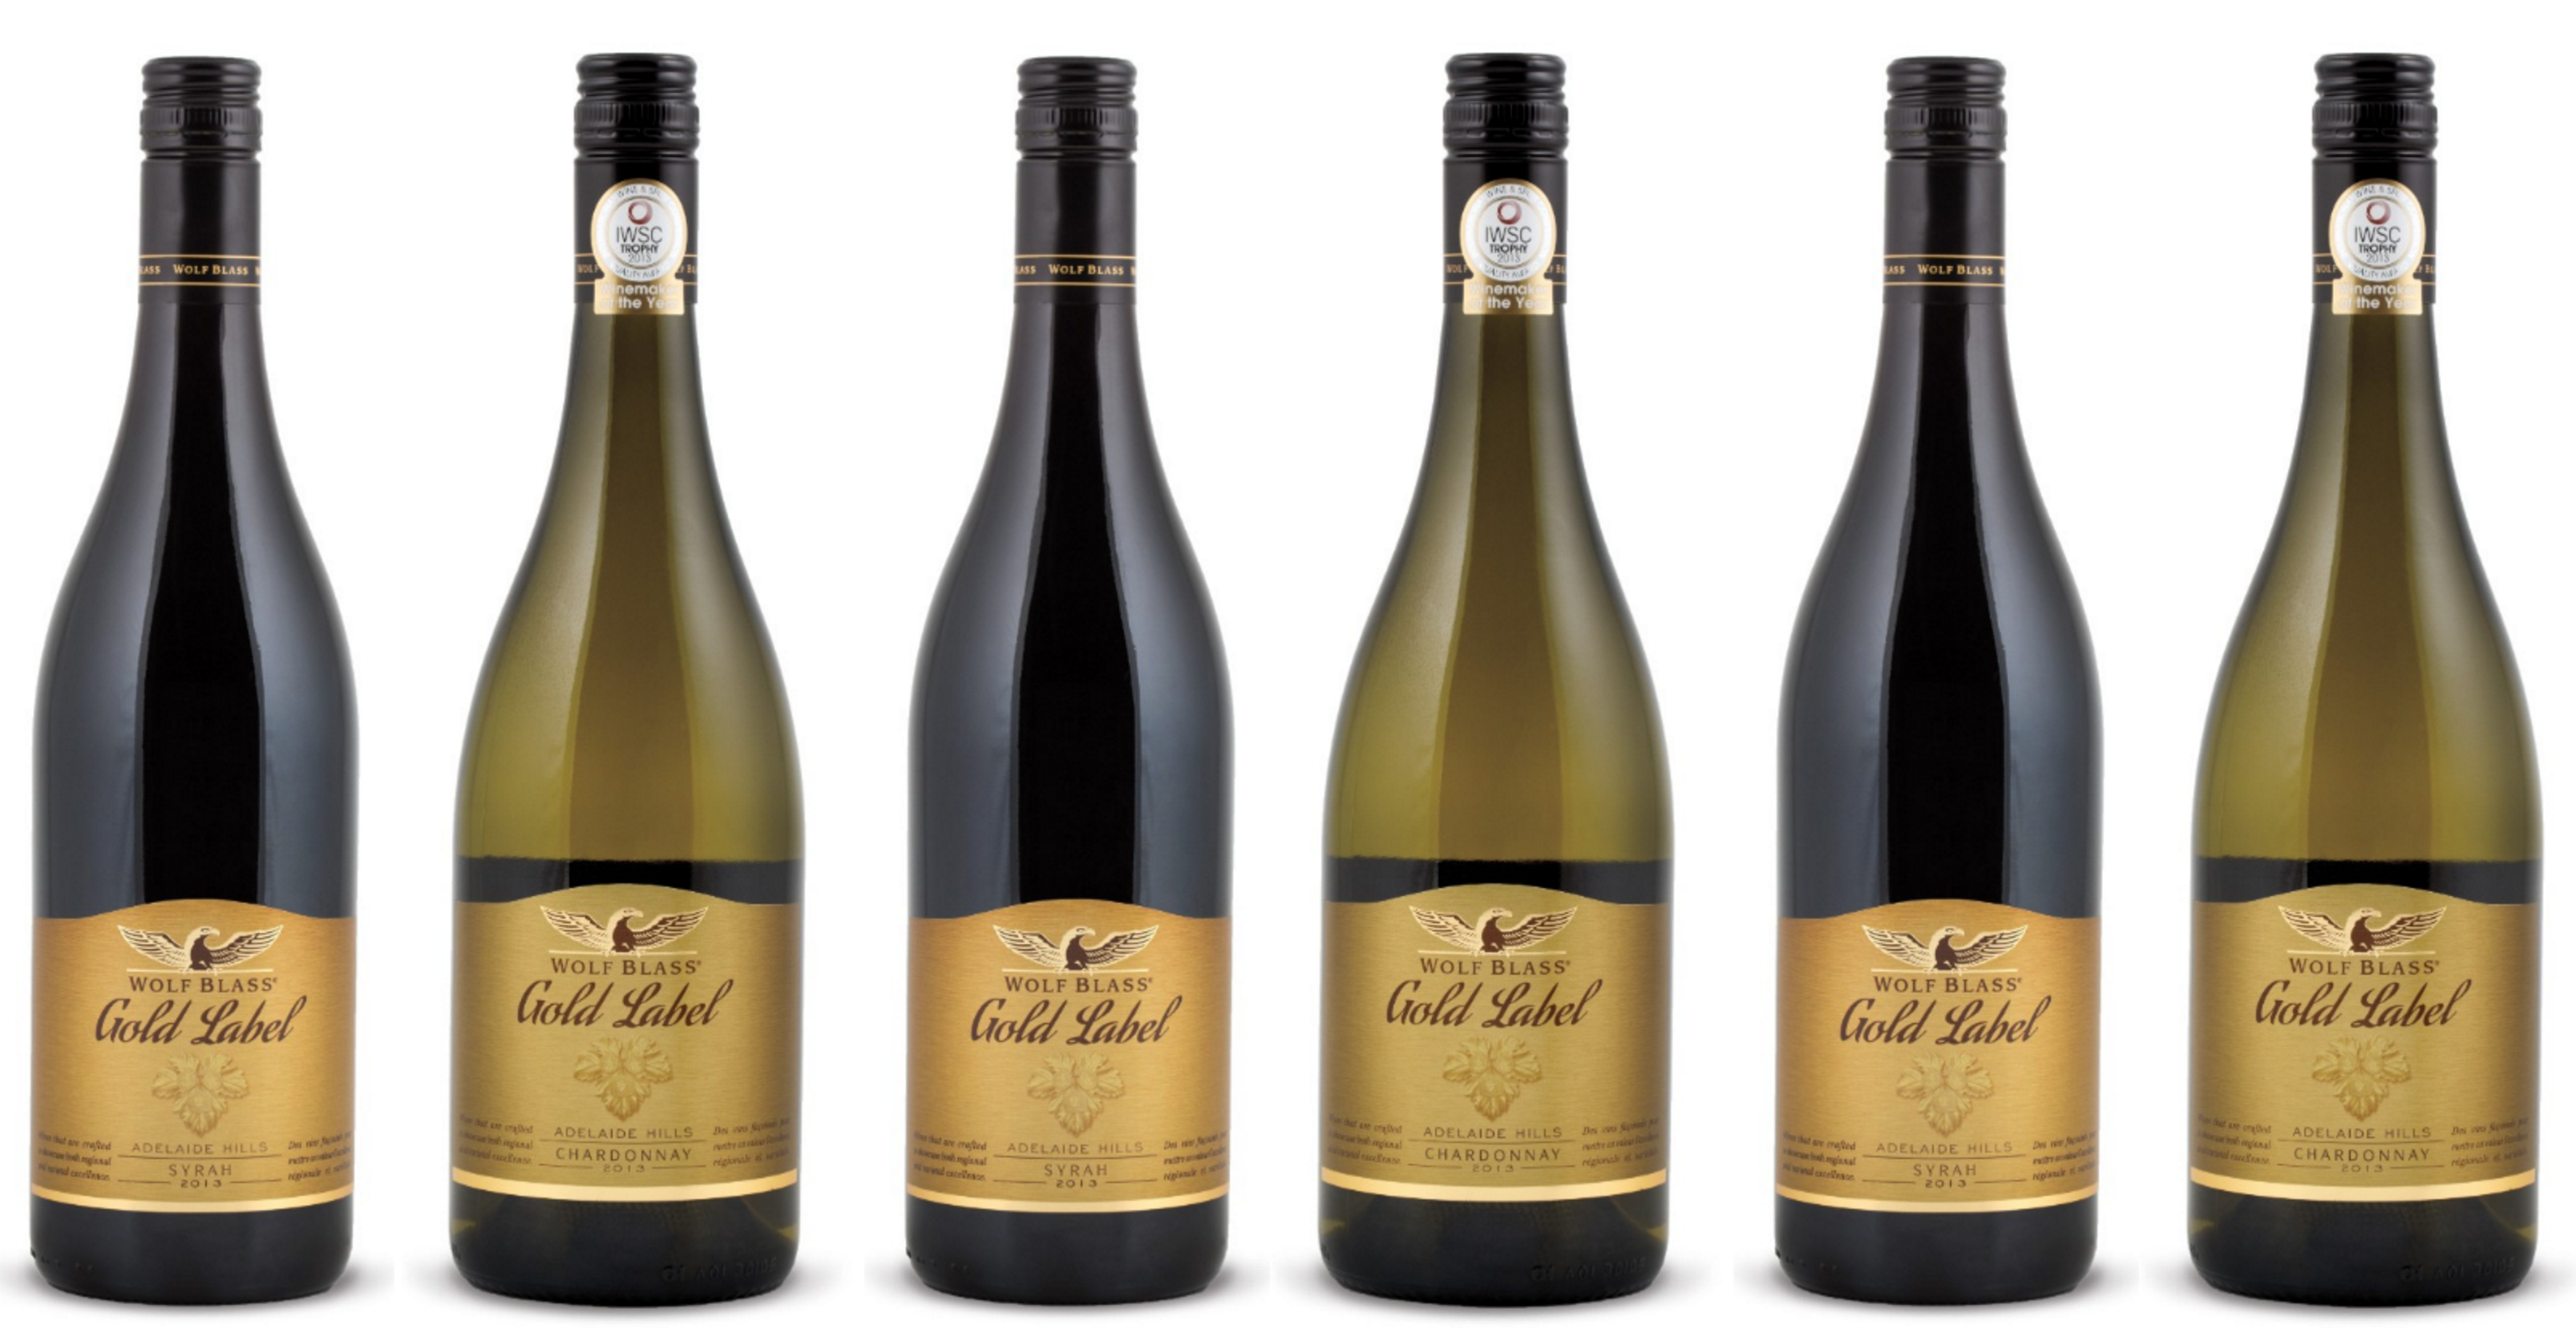 Try These : A Couple Of Wolf Blass Perfect For Turkey Dinner